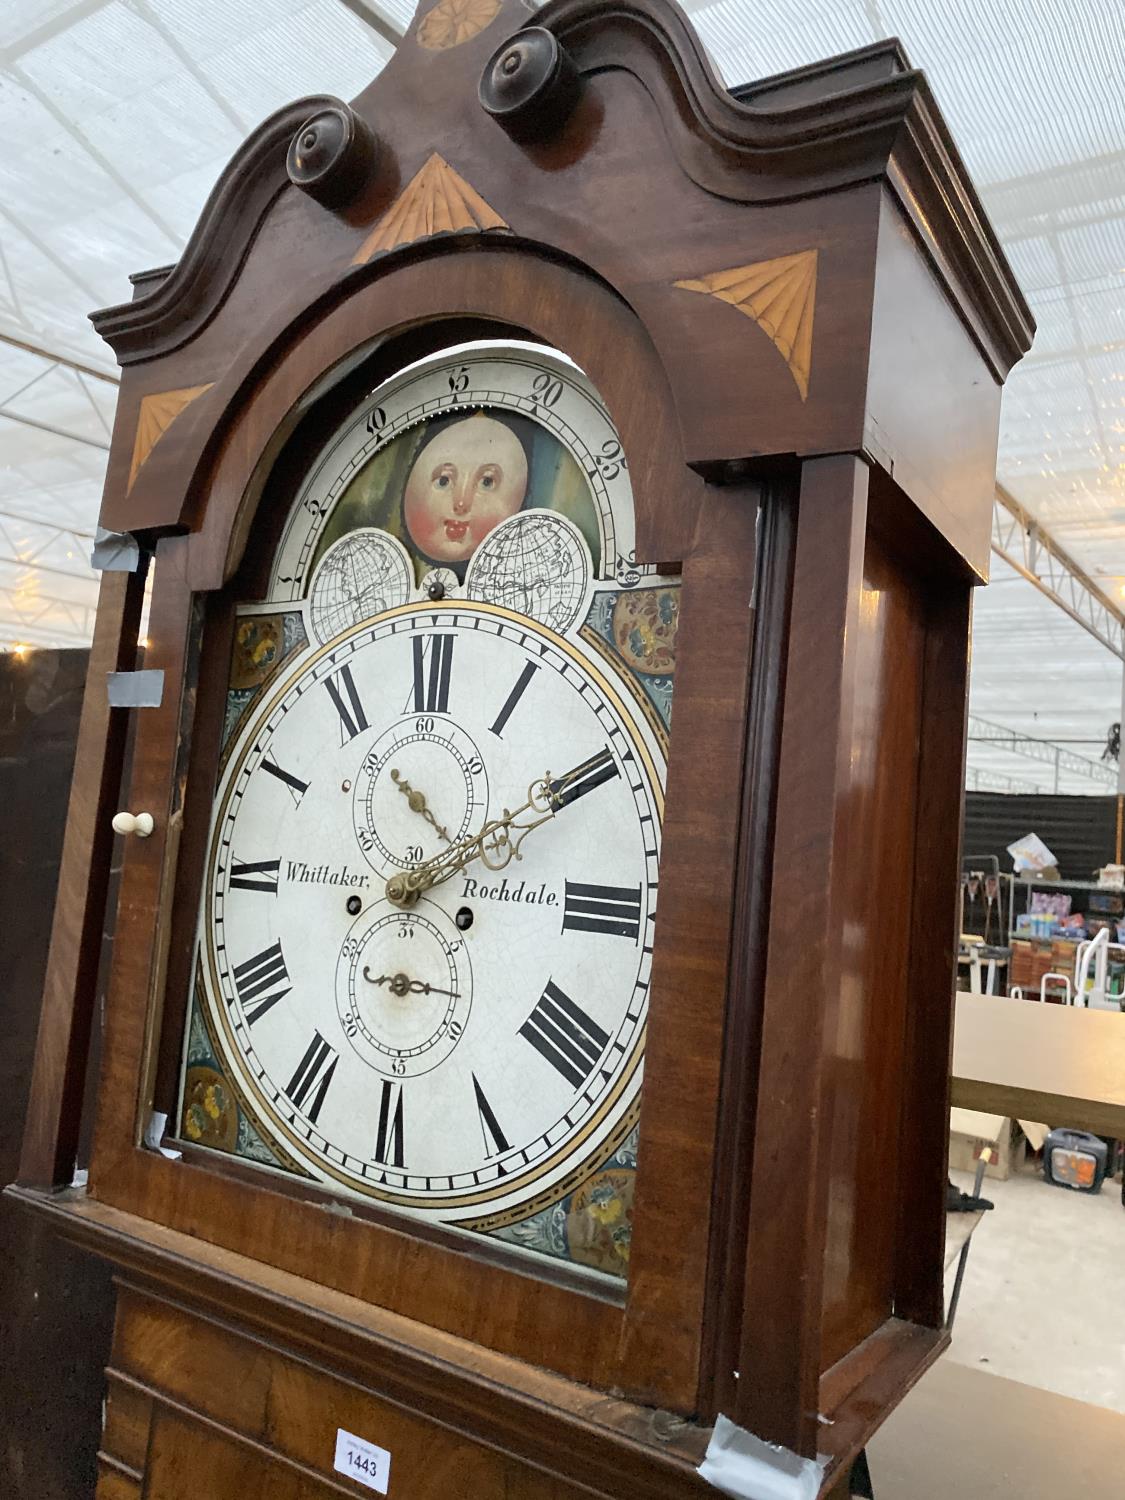 AN INLAID OAK LONG CASE CLOCK WITH A WHITTAKER ROCHDALE FACE